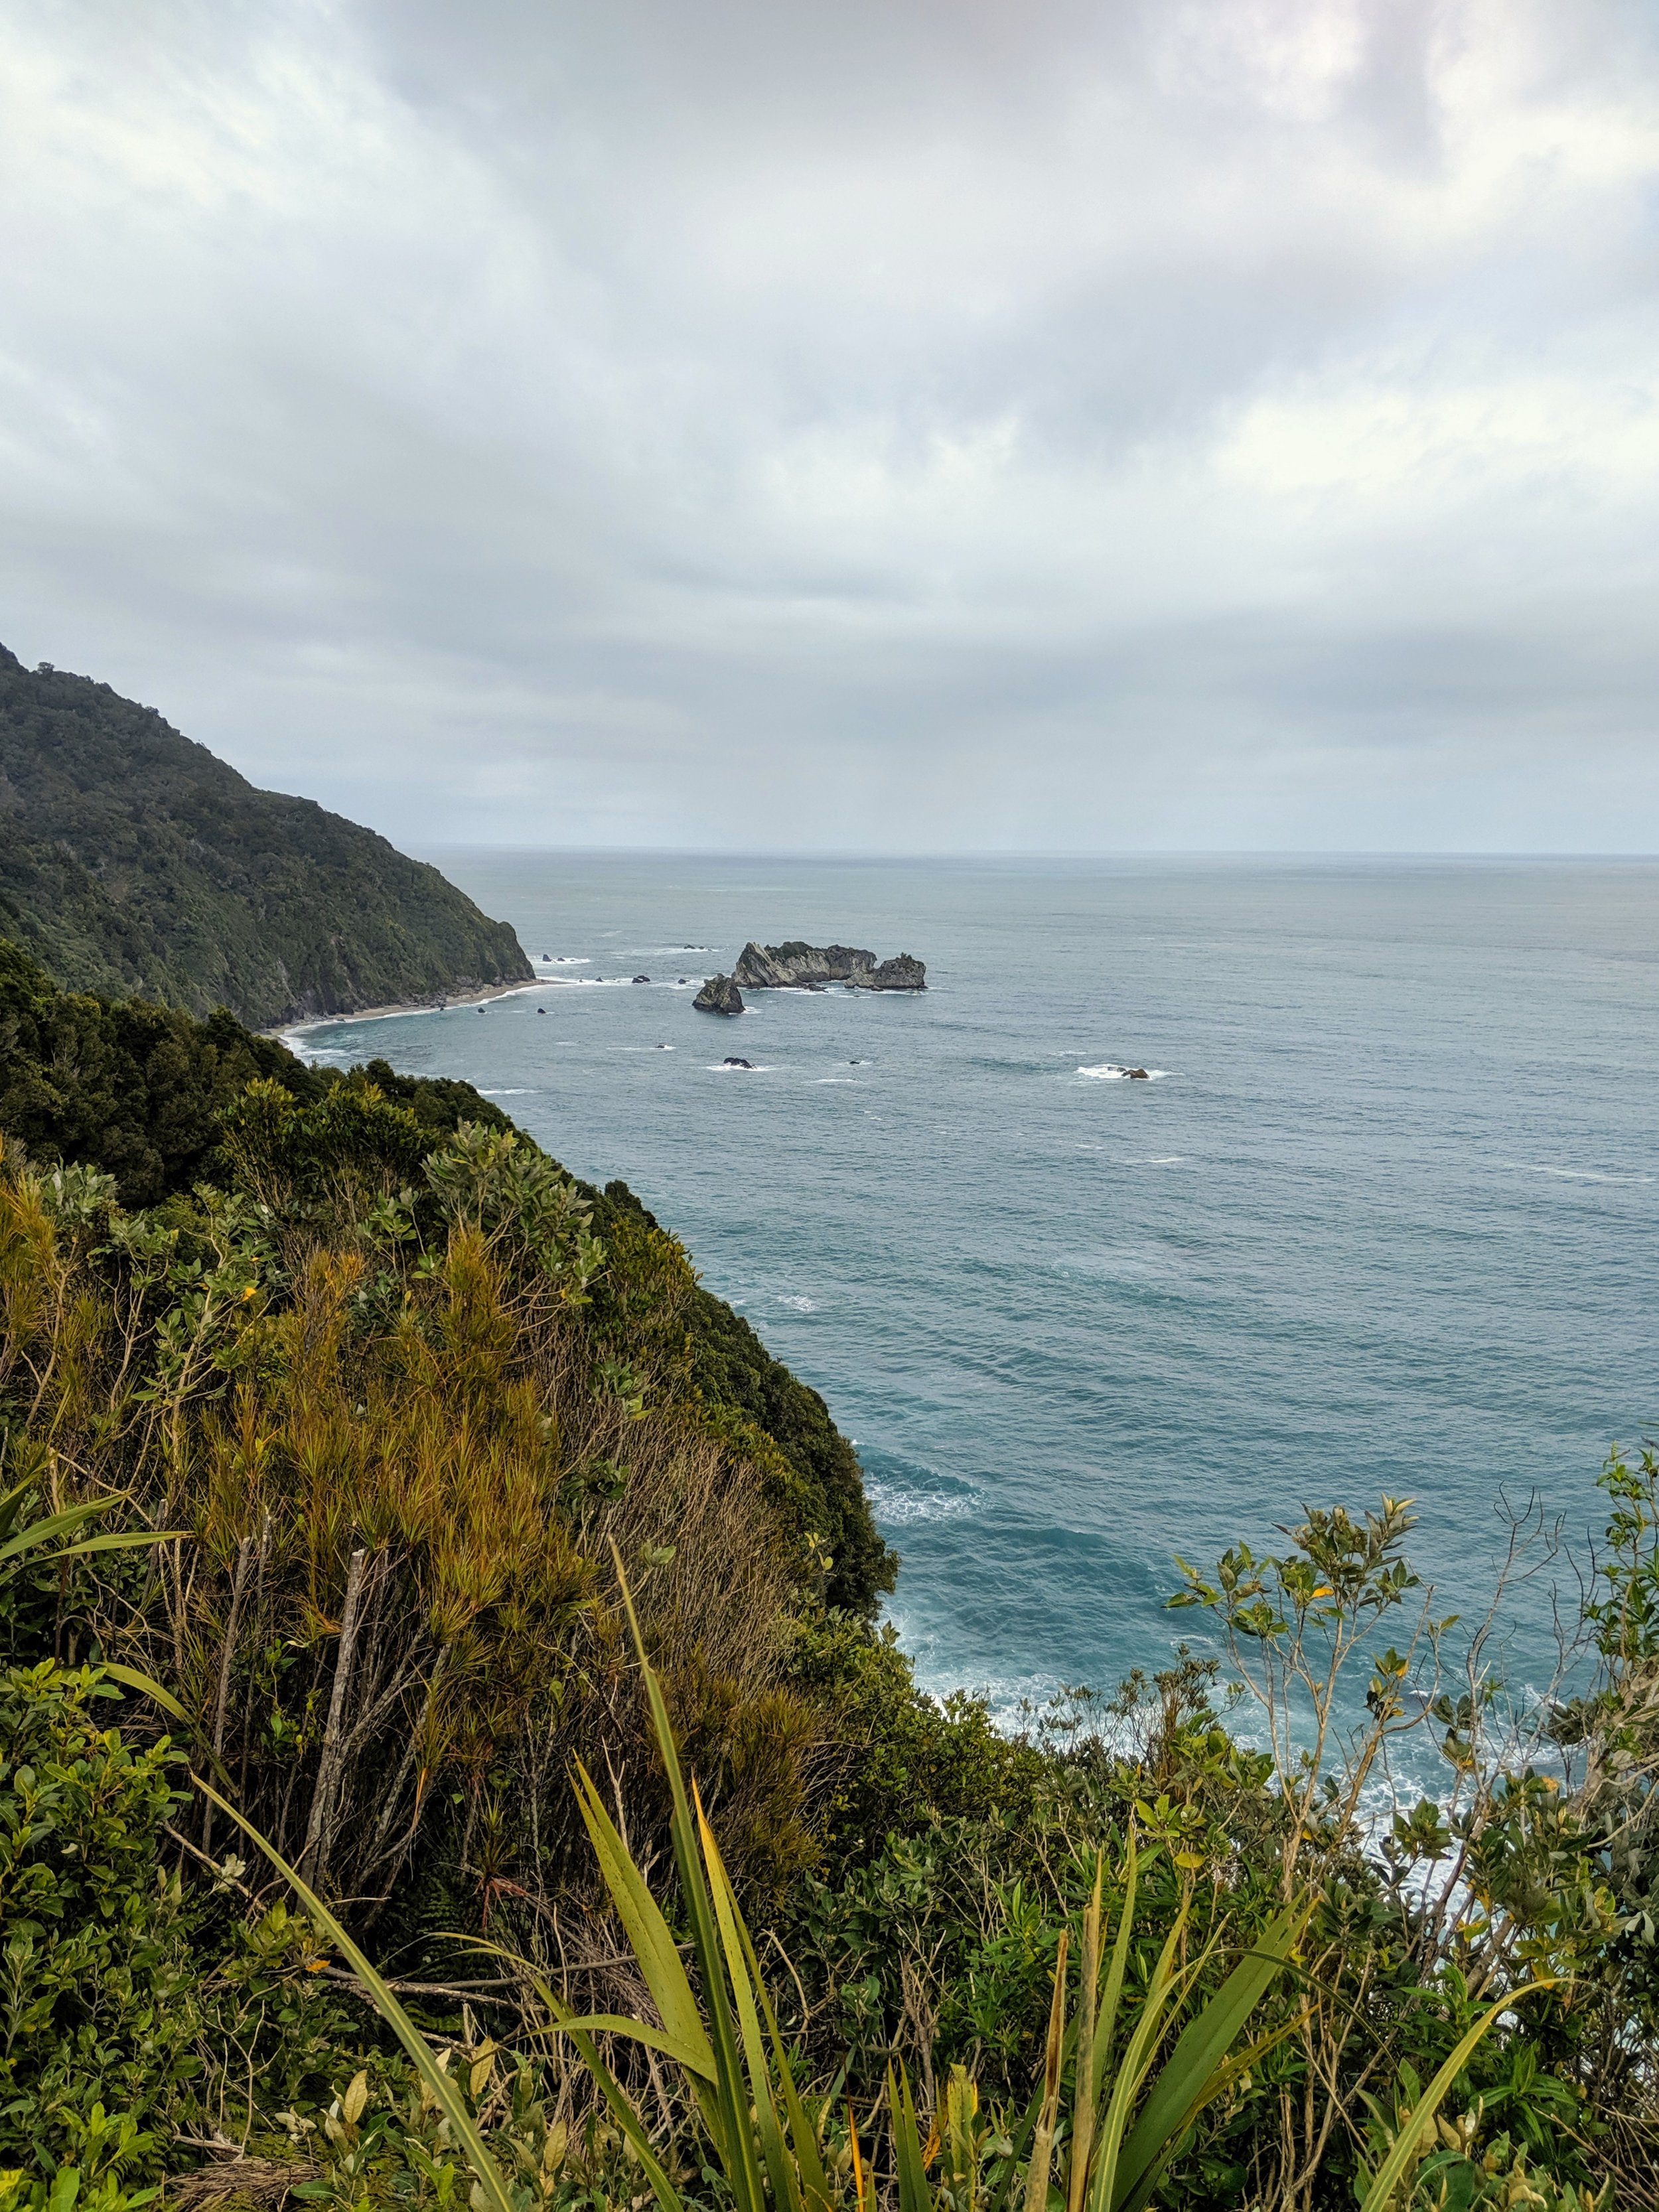  Tasman Sea as seen from Knights Point Lookout. 